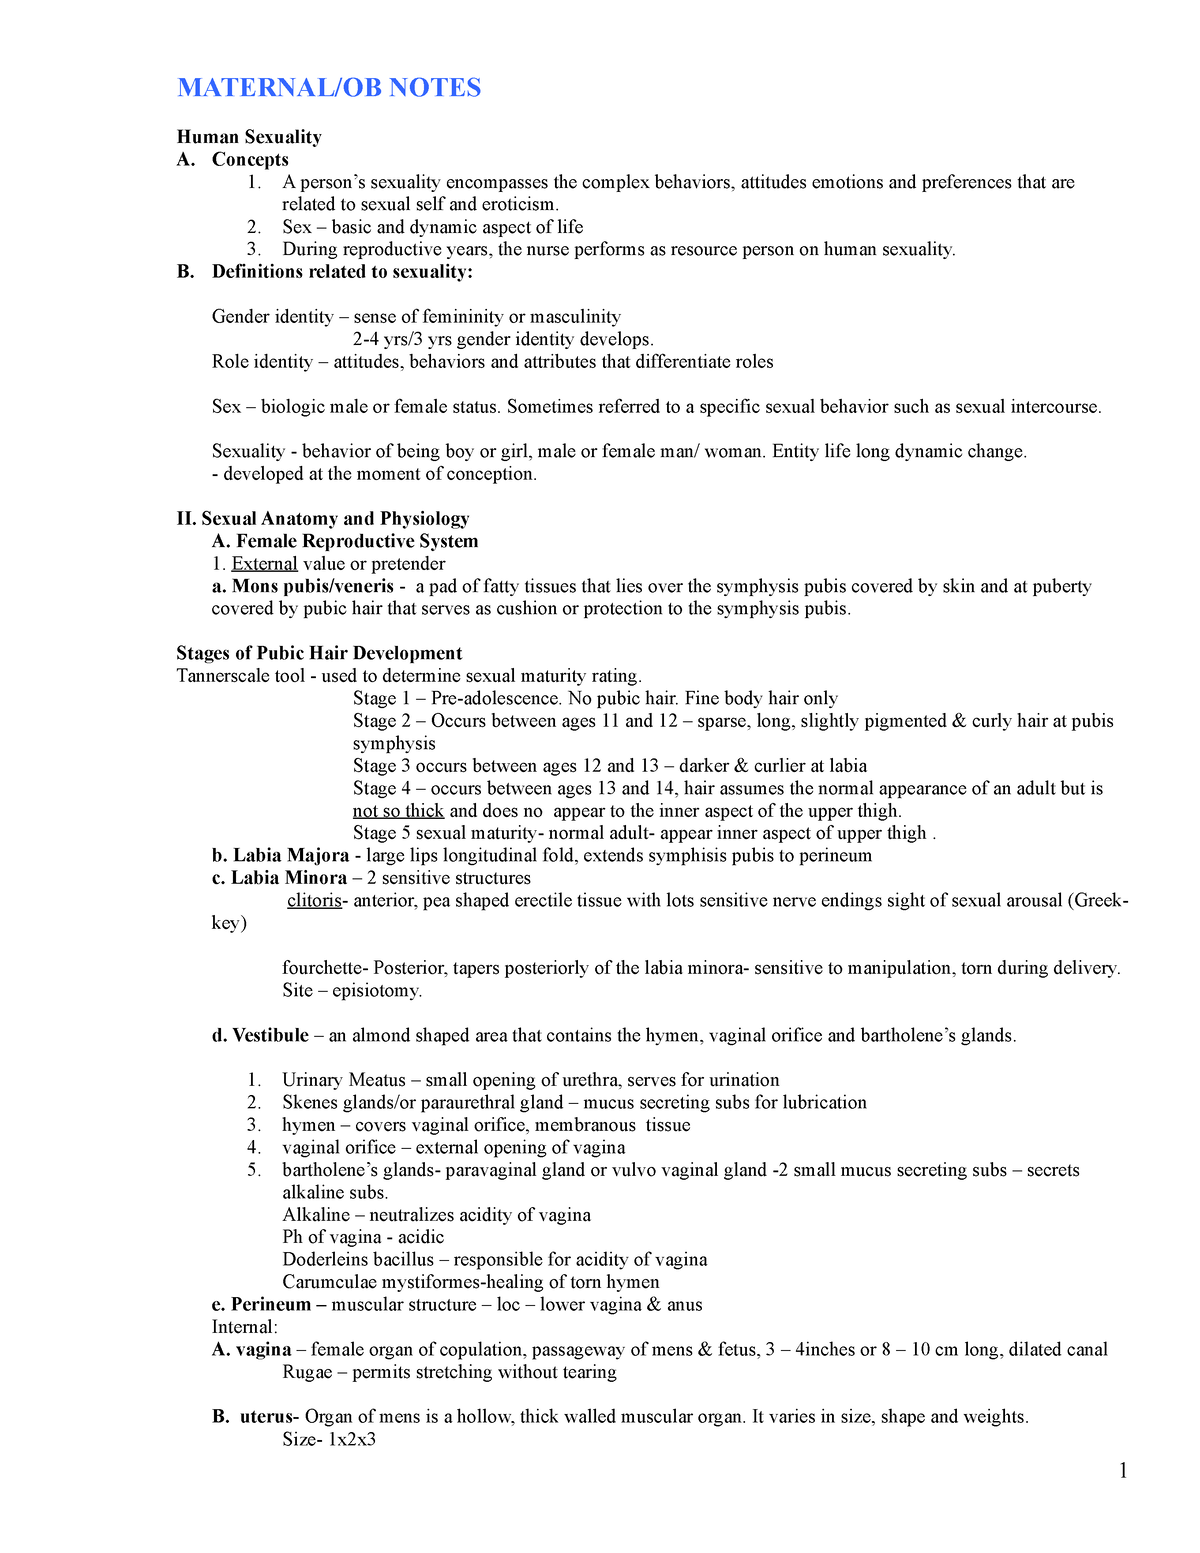 Maternal-OB Notes FOR Nursing - MATERNAL/OB NOTES Human Sexuality A ...